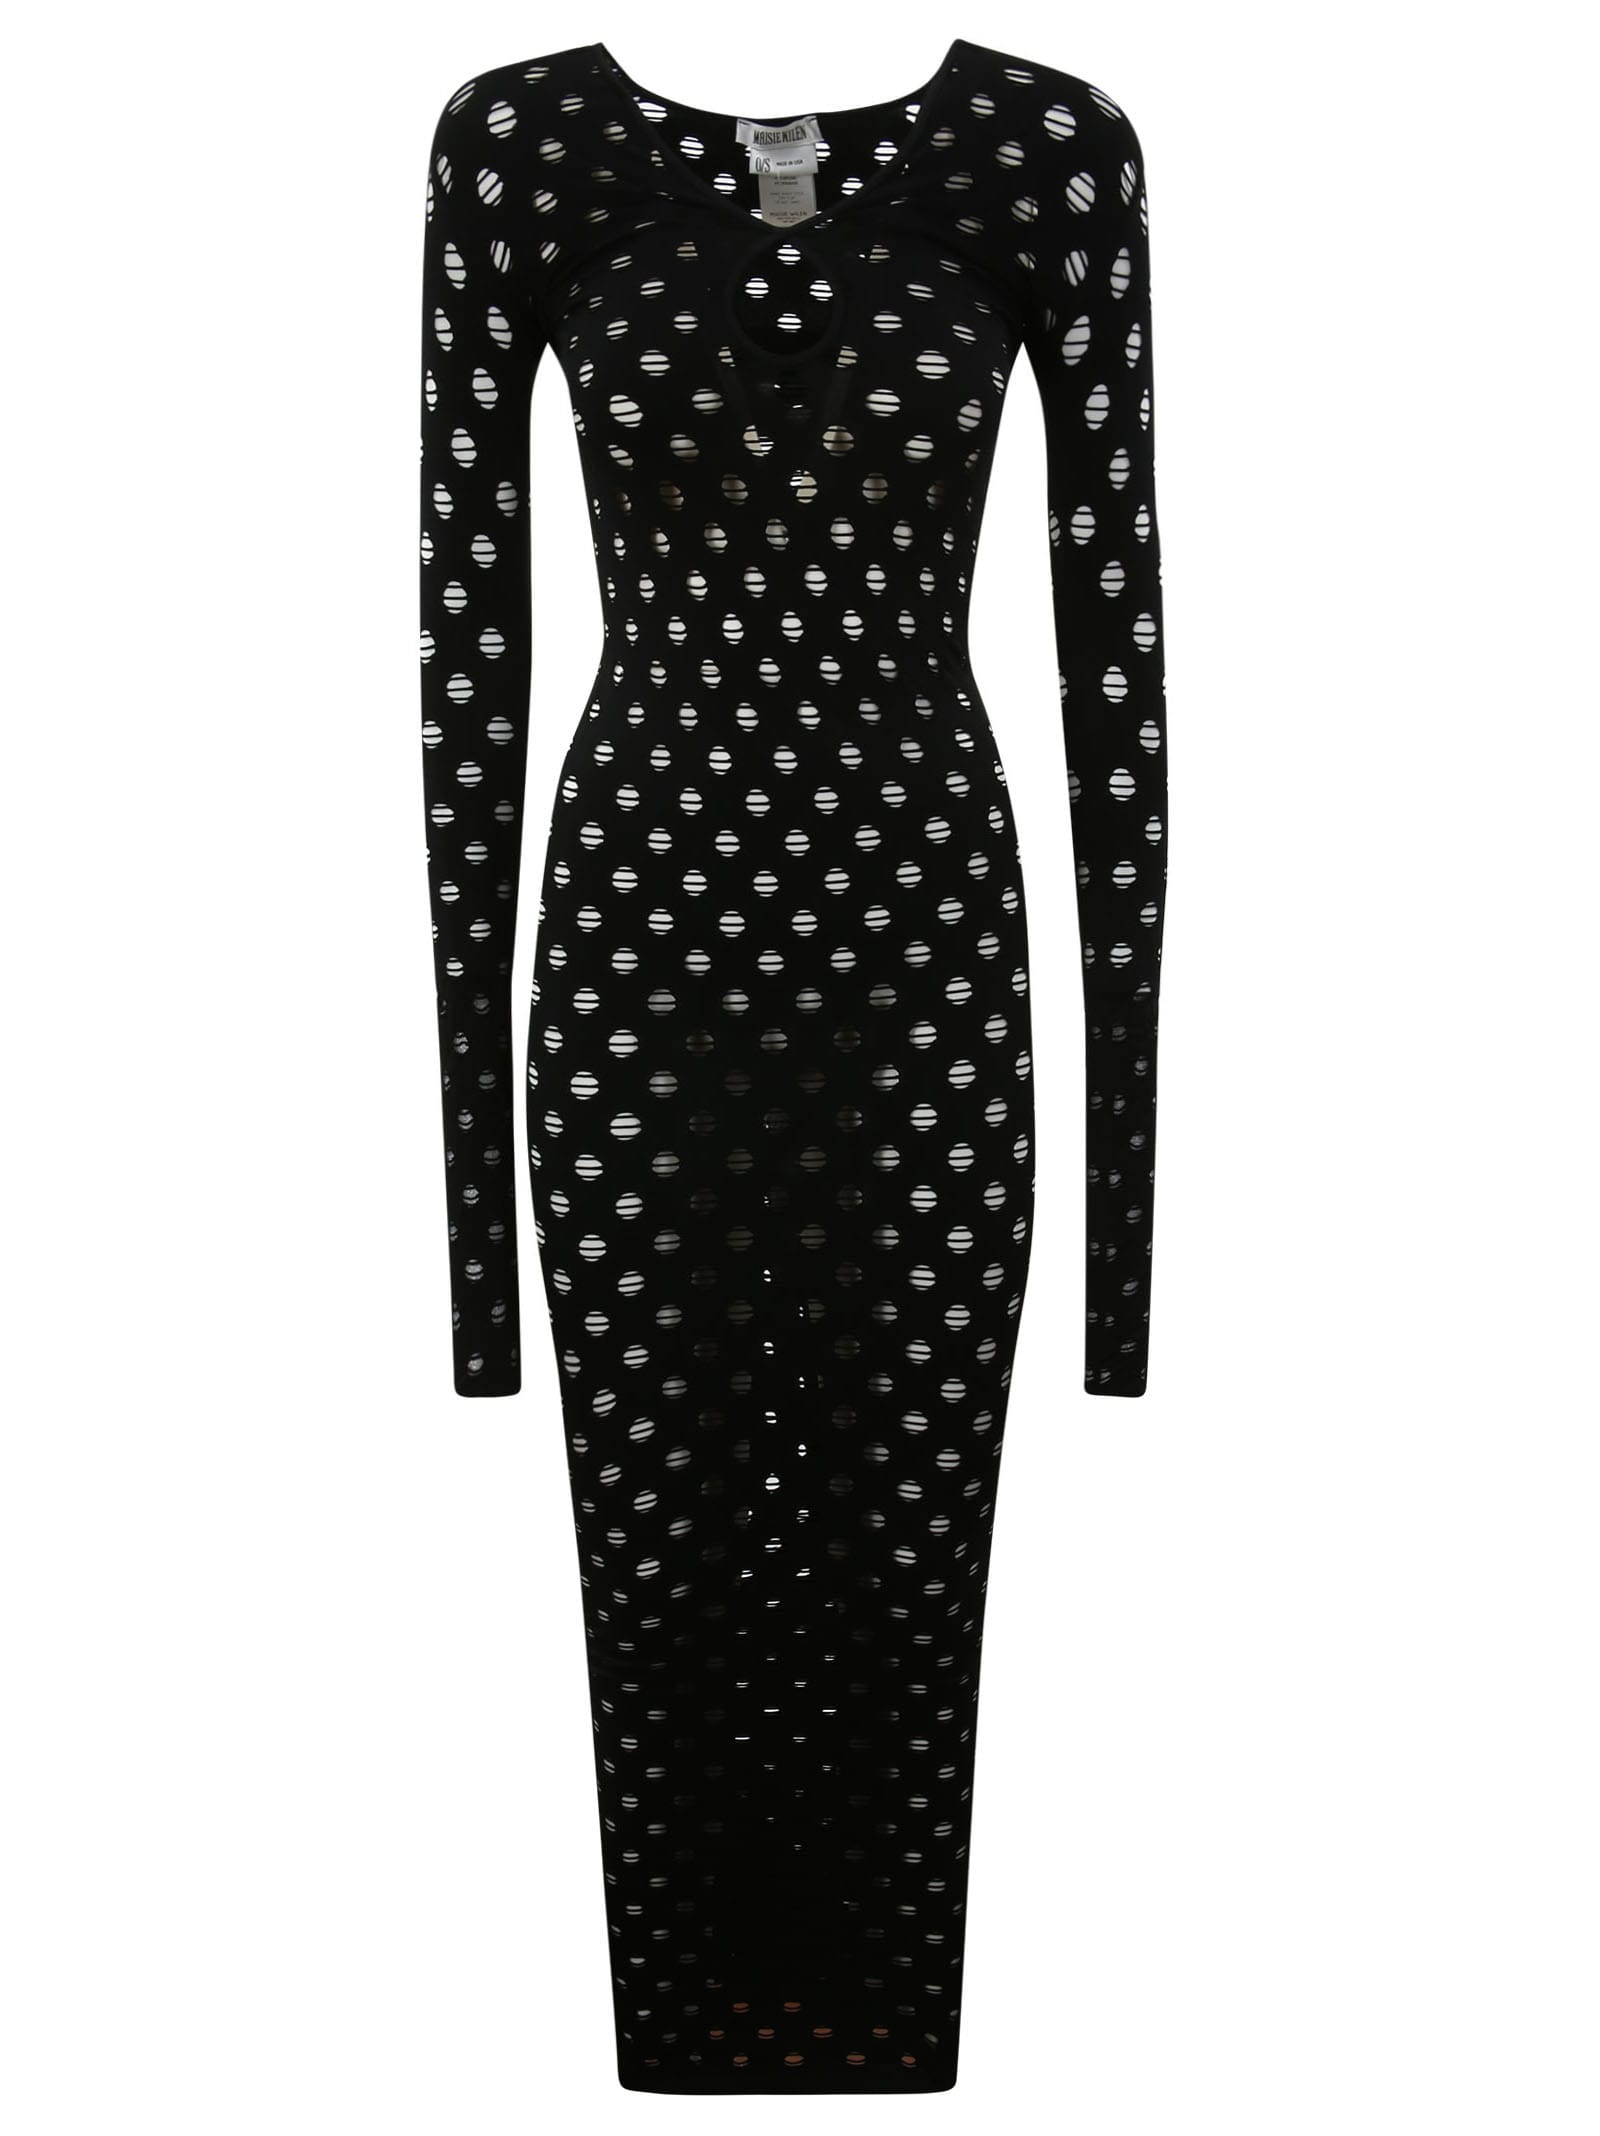 MAISIE WILEN PERFORATED GOWN